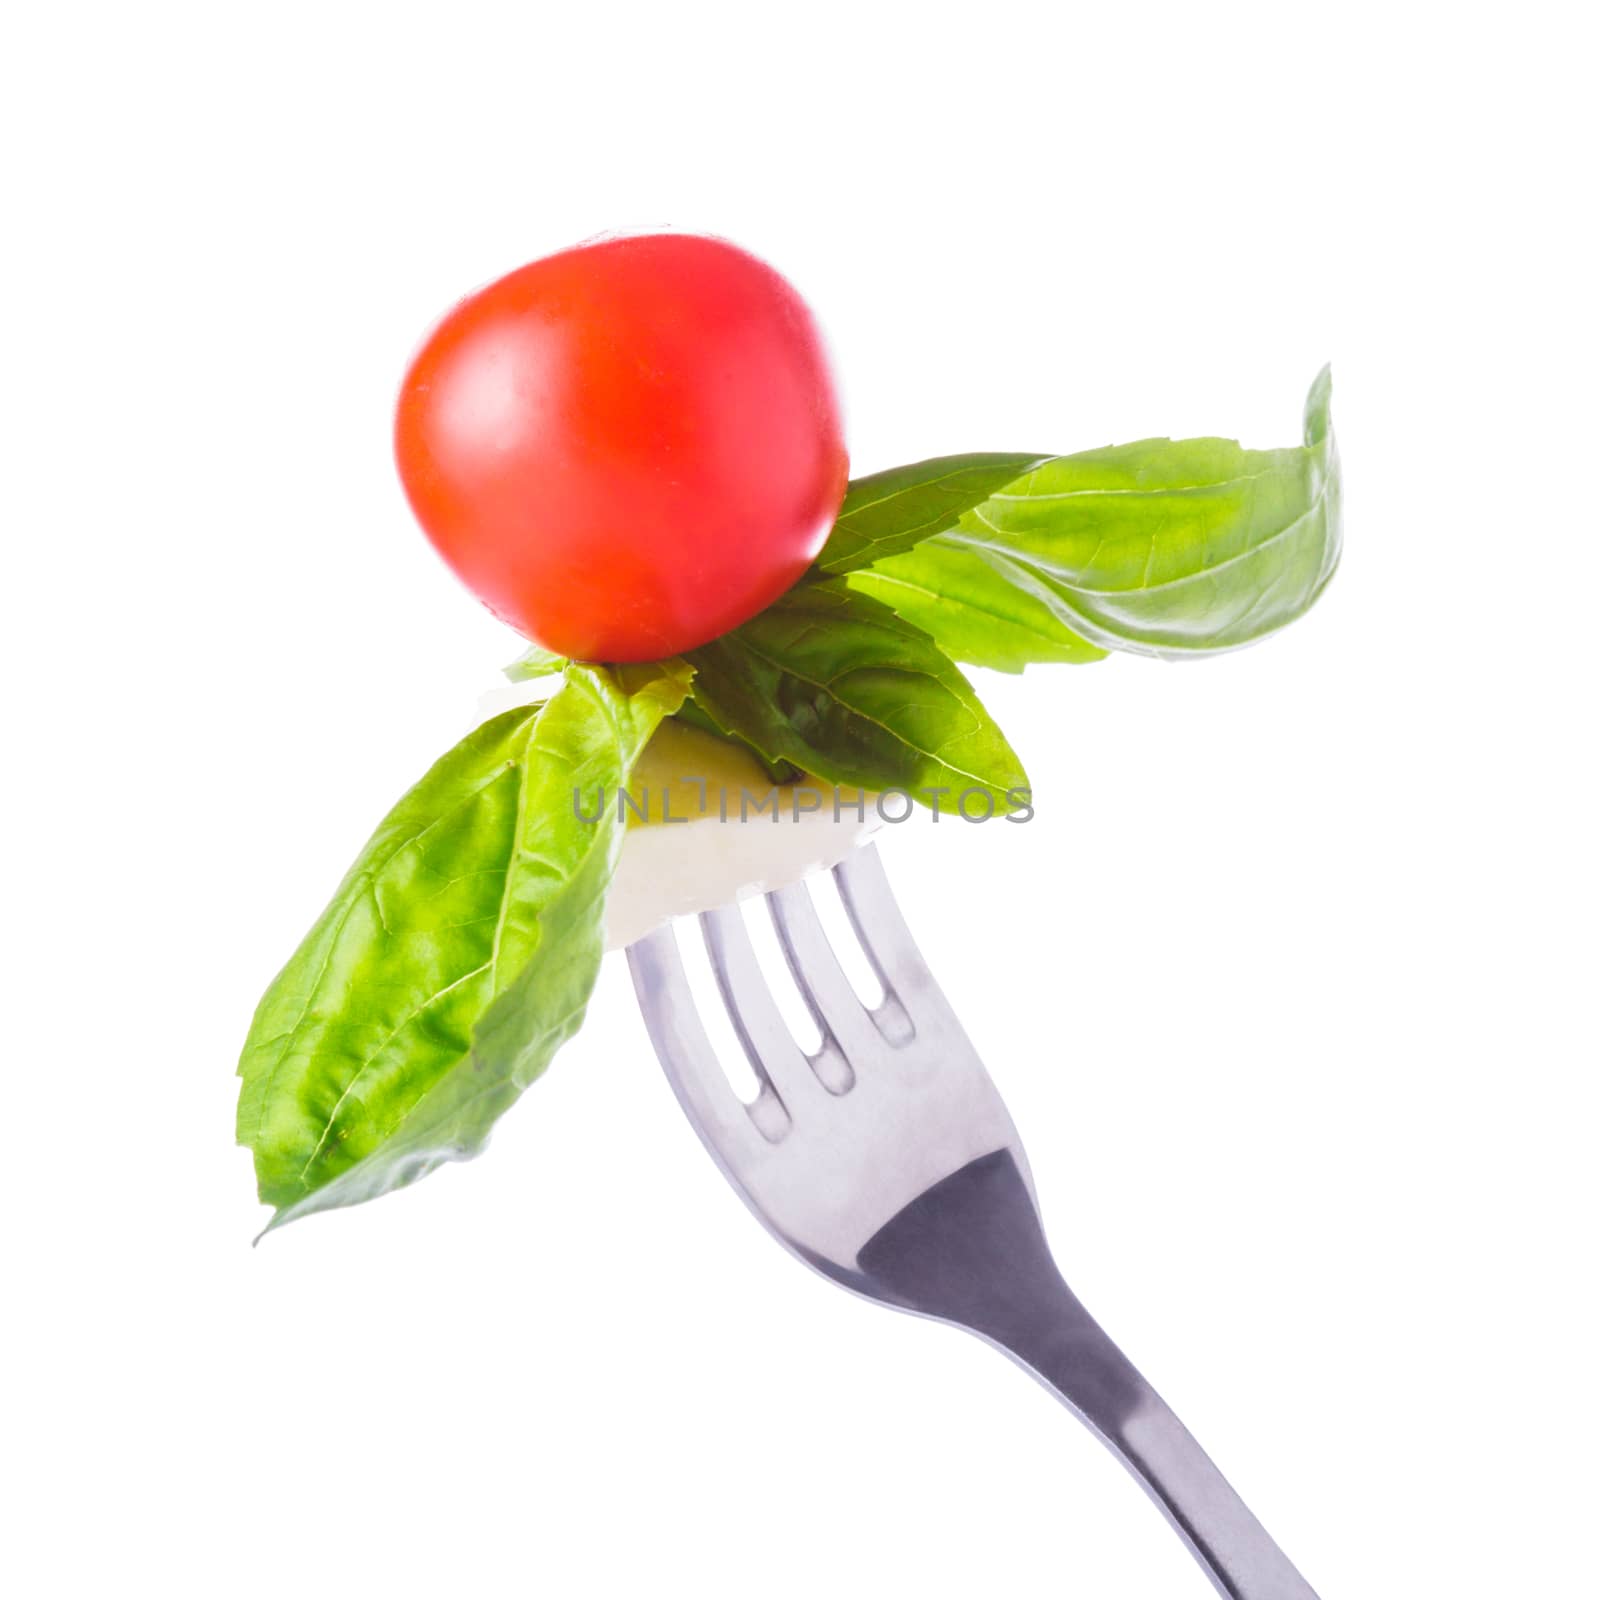 Caprese salad ingredients on the fork isolated on white